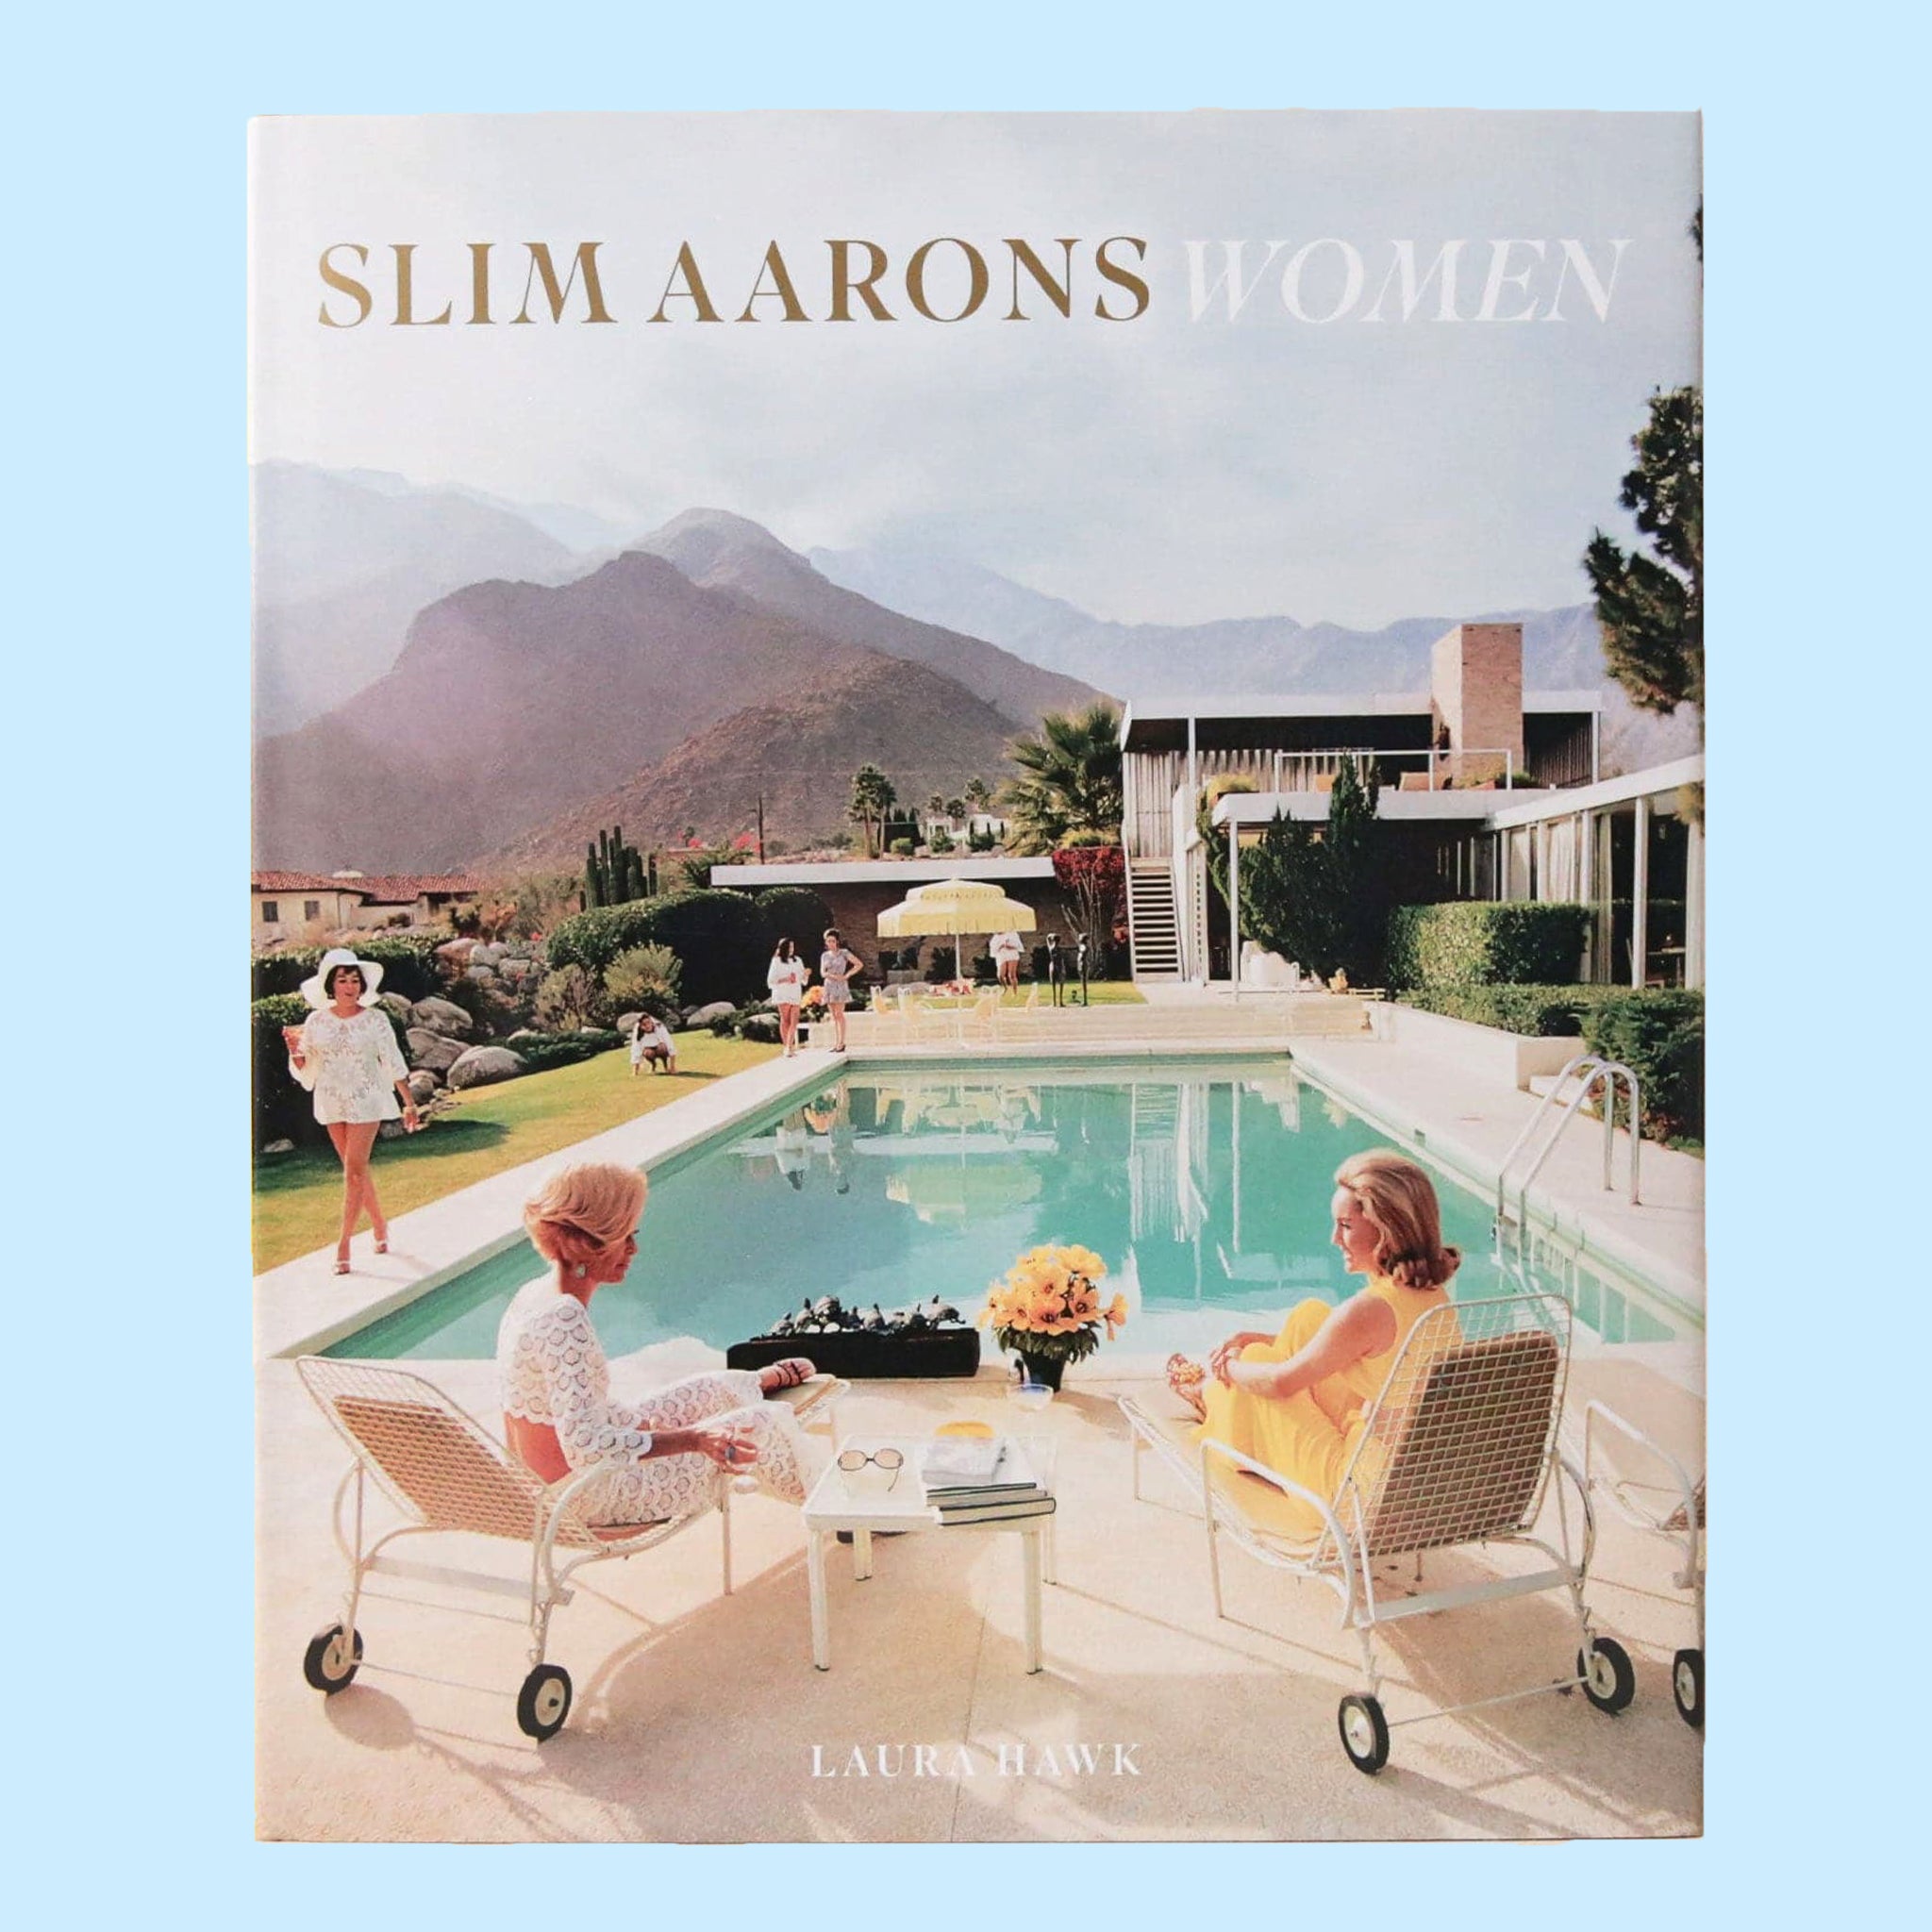 A book cover featuring a photo of 3 women around a pool outside of a midcentury home with a beautiful mountainous background. The title reads, " Slim Aarons Women".